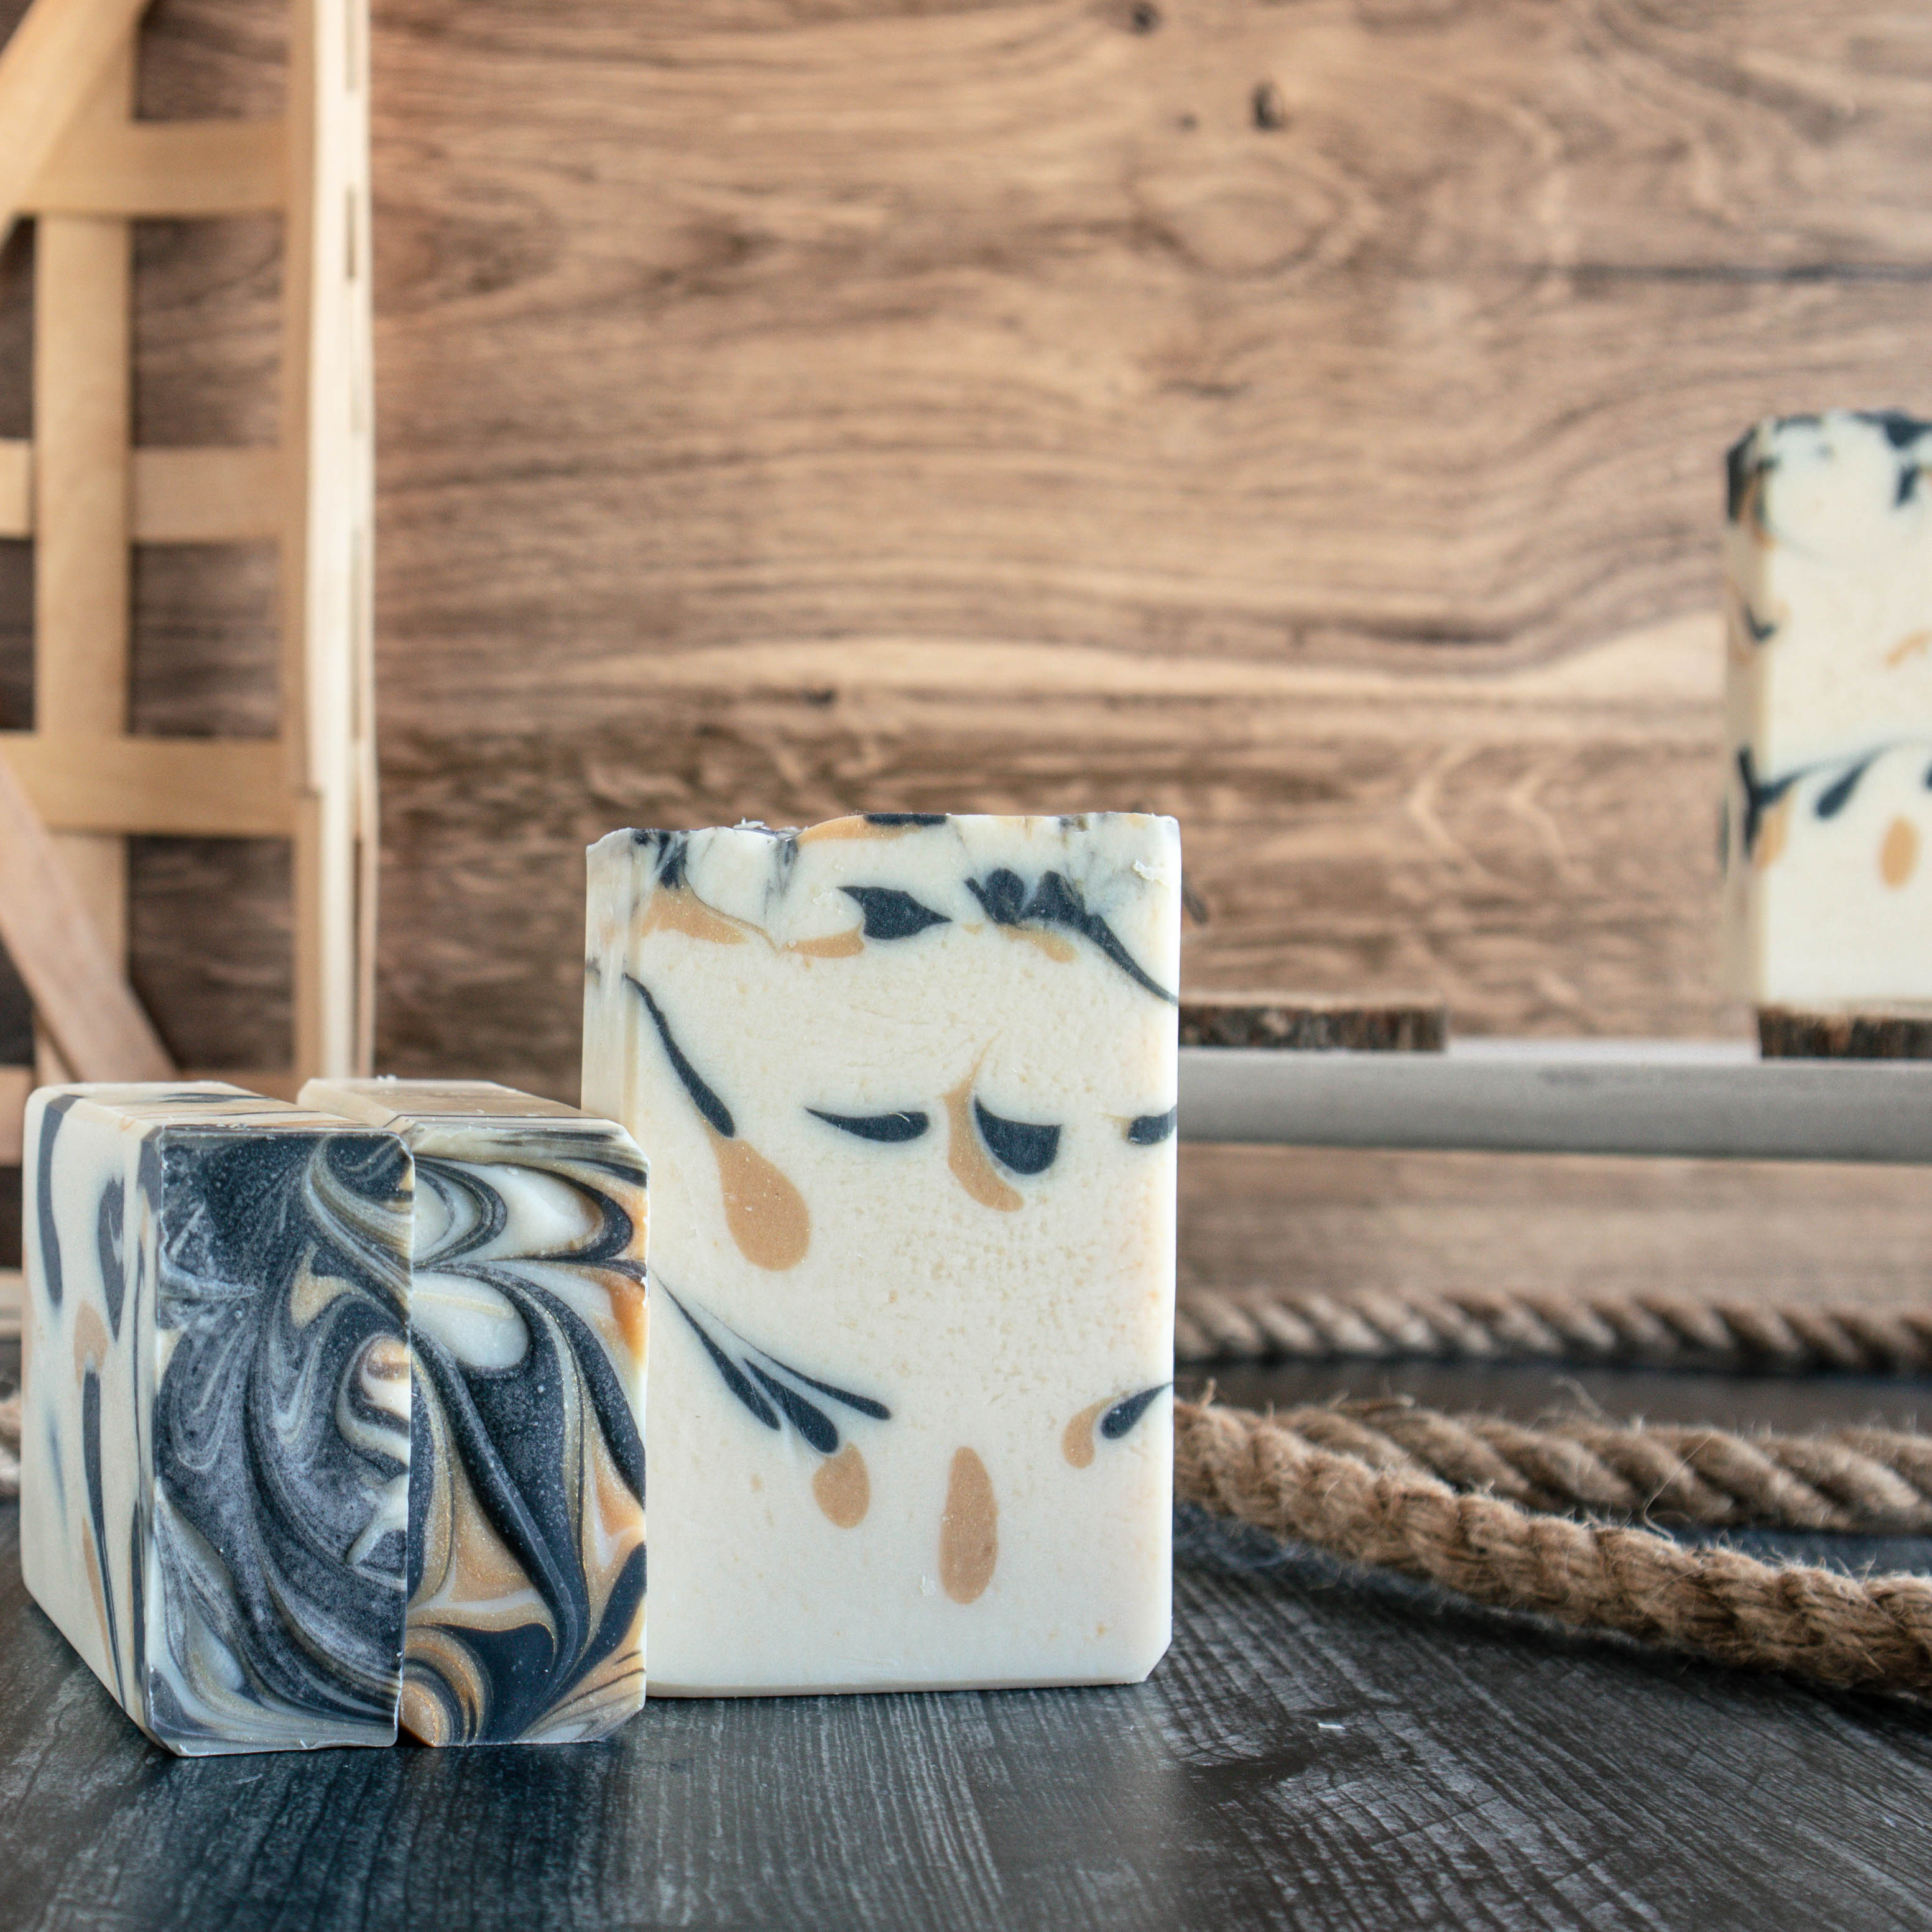 Teal + Cardamom soap showing cream color with drops of gold and black throughout. To the left are 2 bars laying flat showing the pretty black and gold swirls. There is a rope running along behind them with a woven basket in the background on the left.  